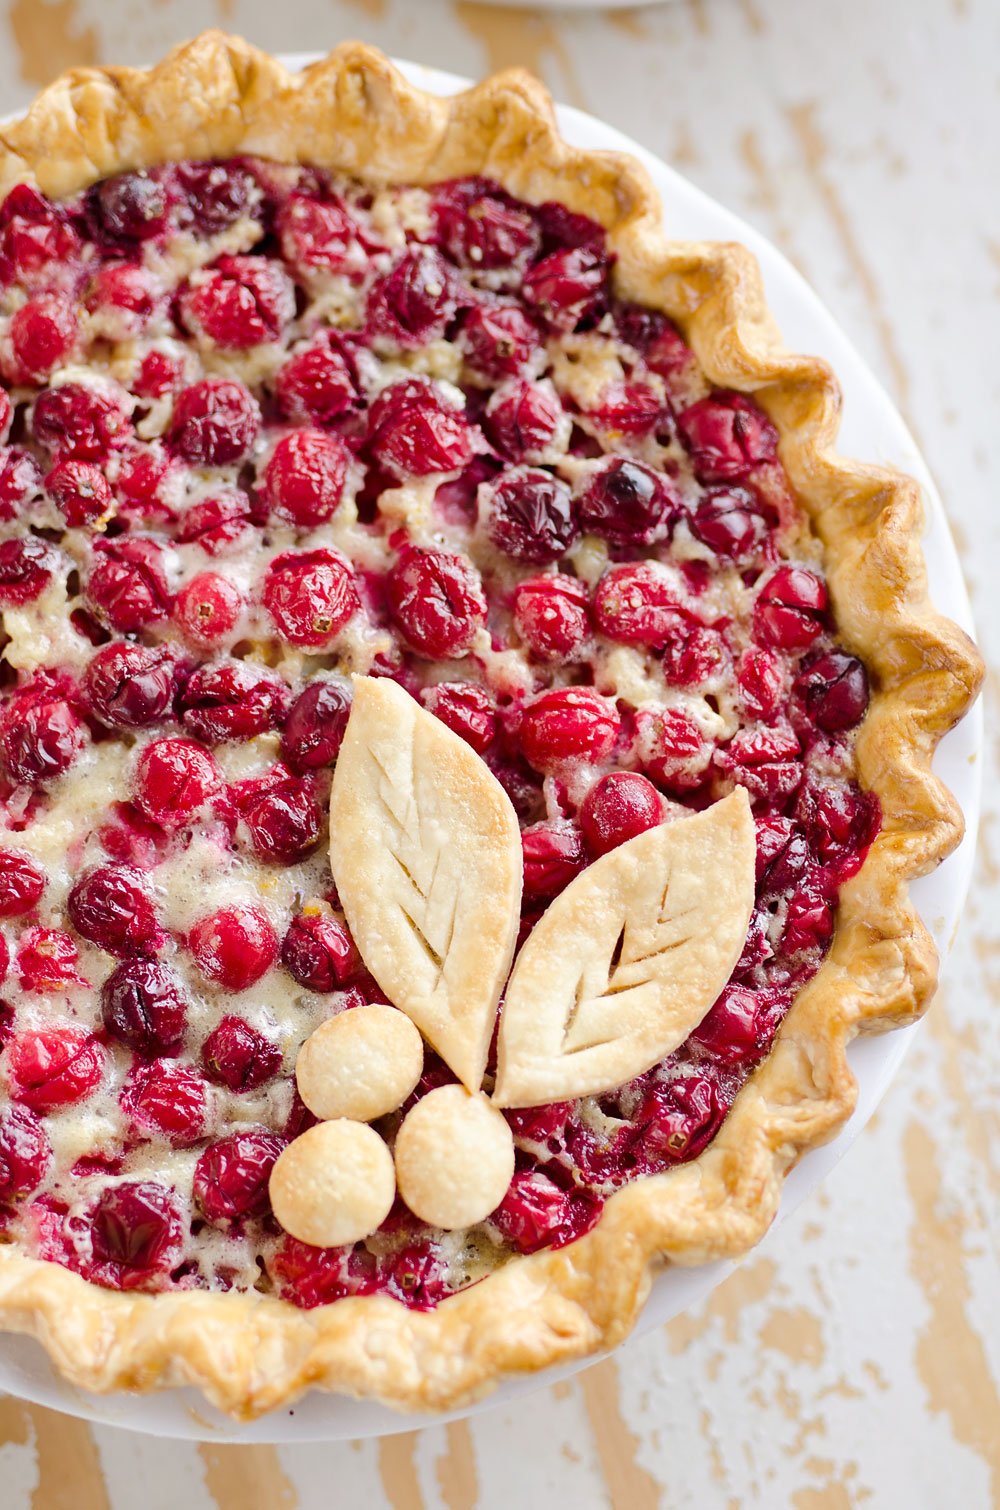 Cranberry Orange Custard Pie is a festive and unique dessert to add to your holiday menu. A flaky pie crust is filled with silky sweet custard laced with orange zest and tart cranberries for a special treat you won't forget!